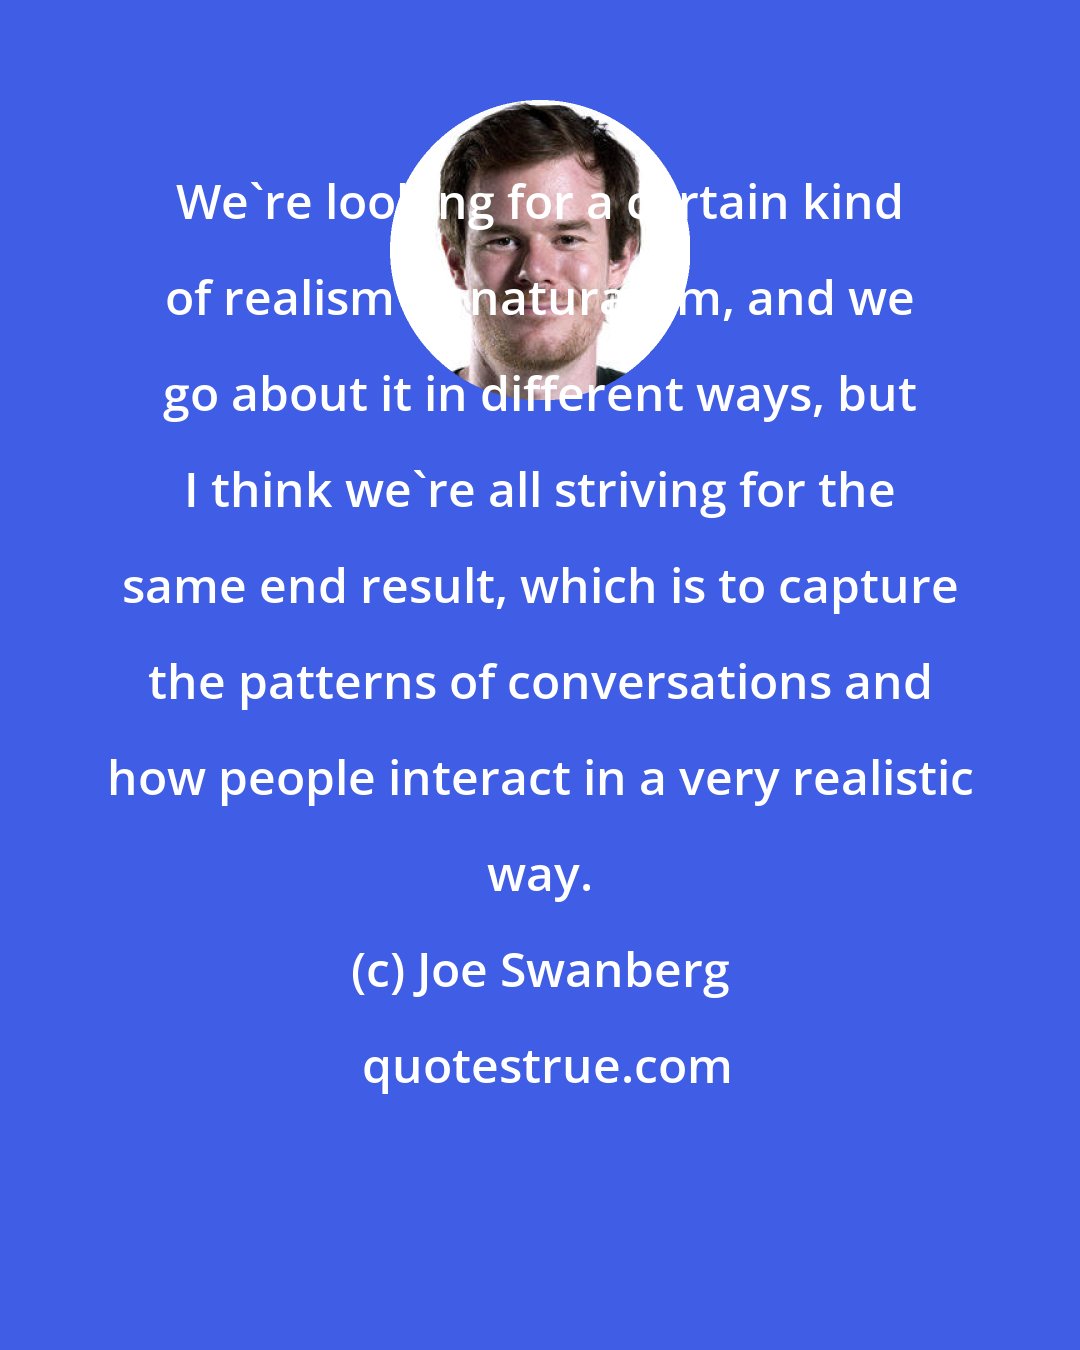 Joe Swanberg: We're looking for a certain kind of realism or naturalism, and we go about it in different ways, but I think we're all striving for the same end result, which is to capture the patterns of conversations and how people interact in a very realistic way.